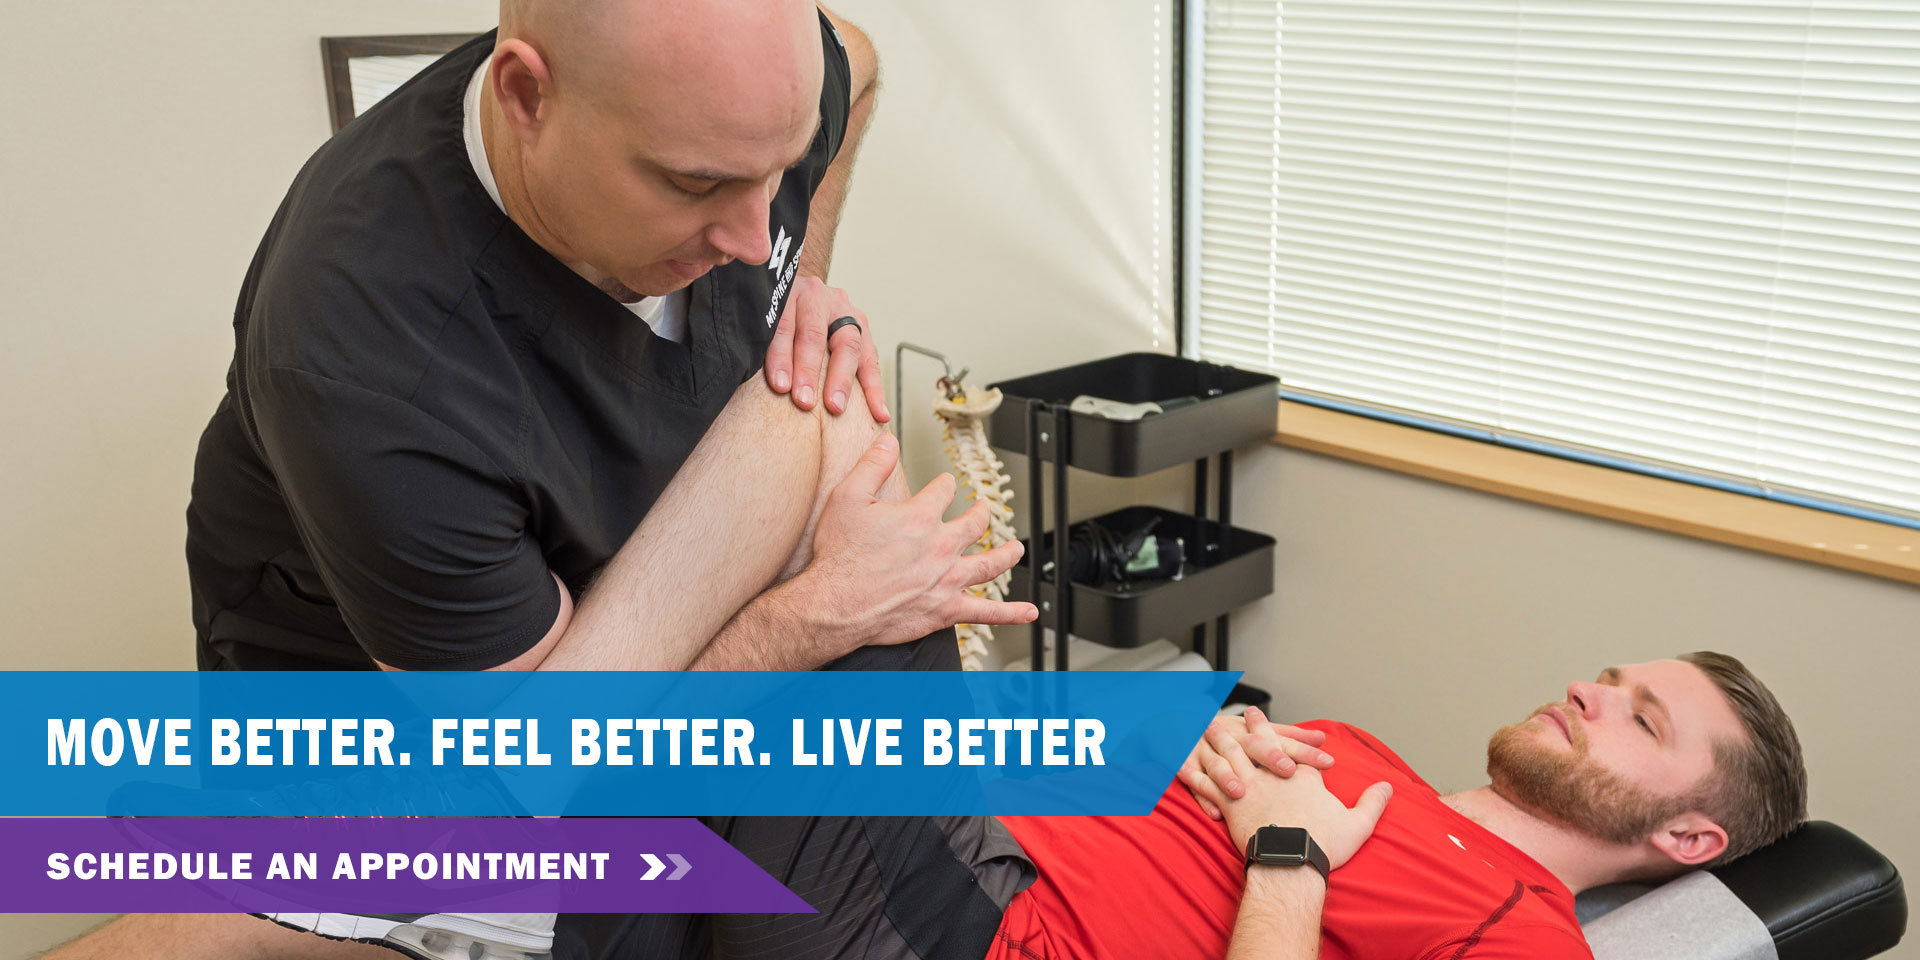 Sports Injuries - MN Spine and Sport Clinic in Woodbury, MN